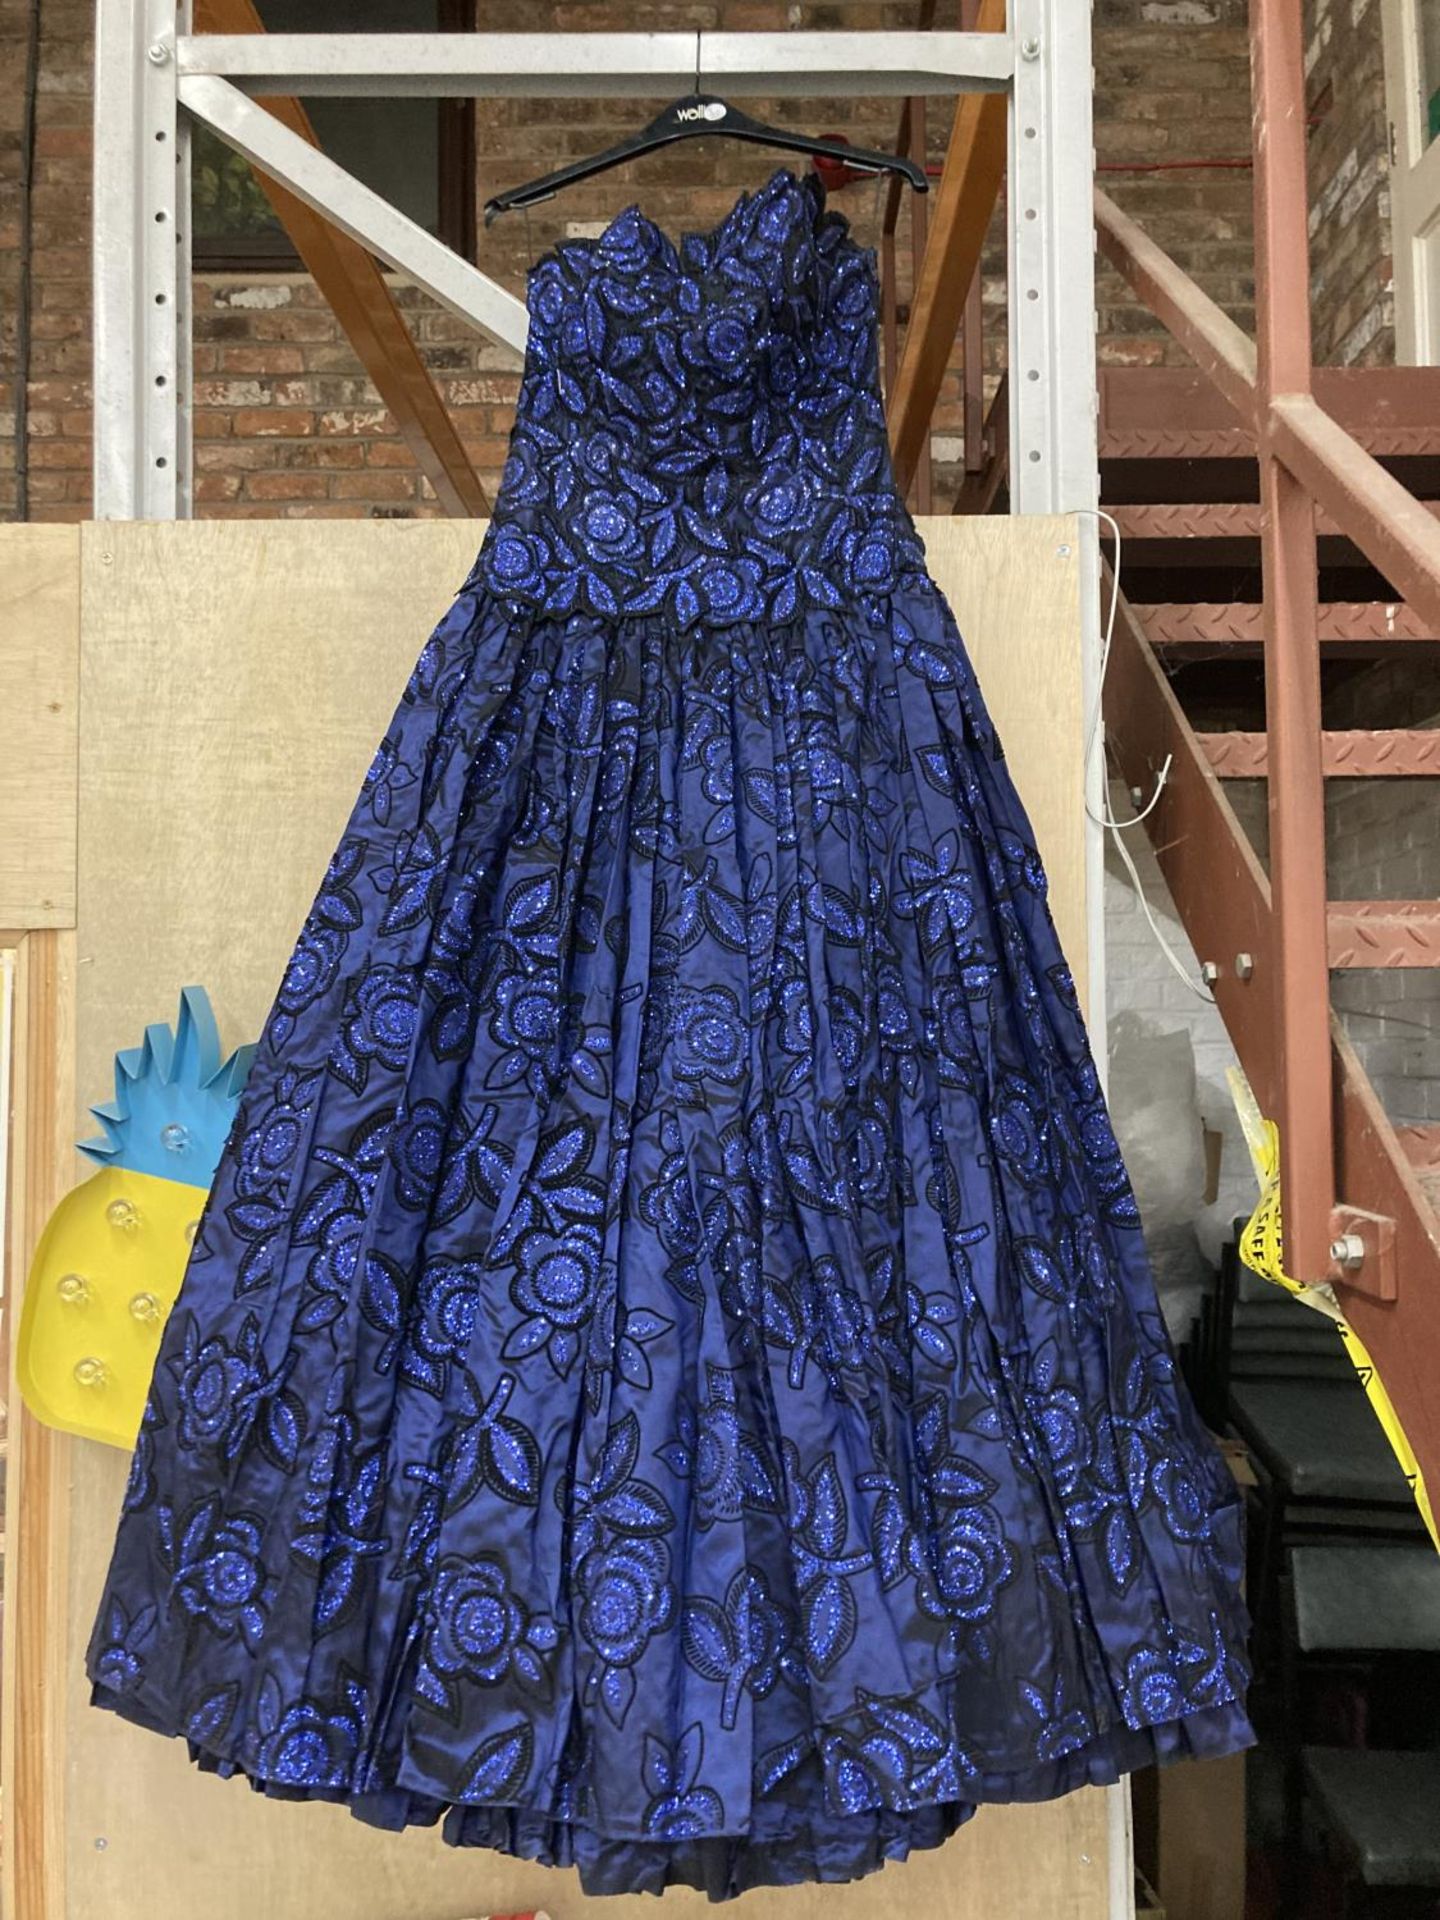 A MIDNIGHT BLUE DESIGNER SEQUINED SPECIAL OCCASION DRESS. SMALL SIZE